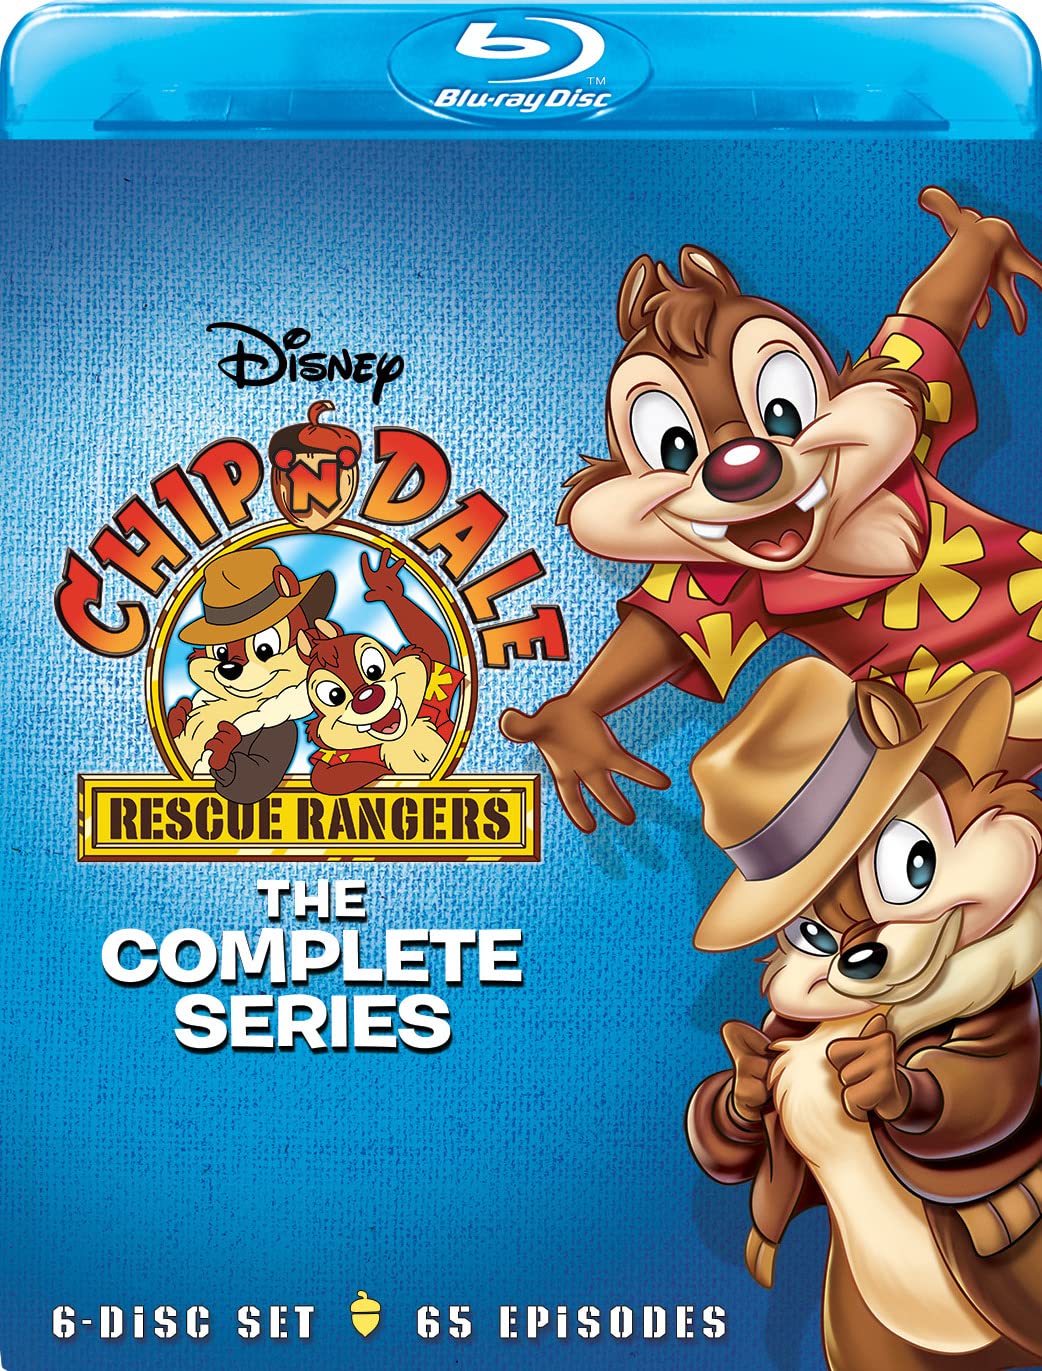 Chip 'n' Dale's Rescue Rangers: Complete Series Blu-ray $24.96 Amazon